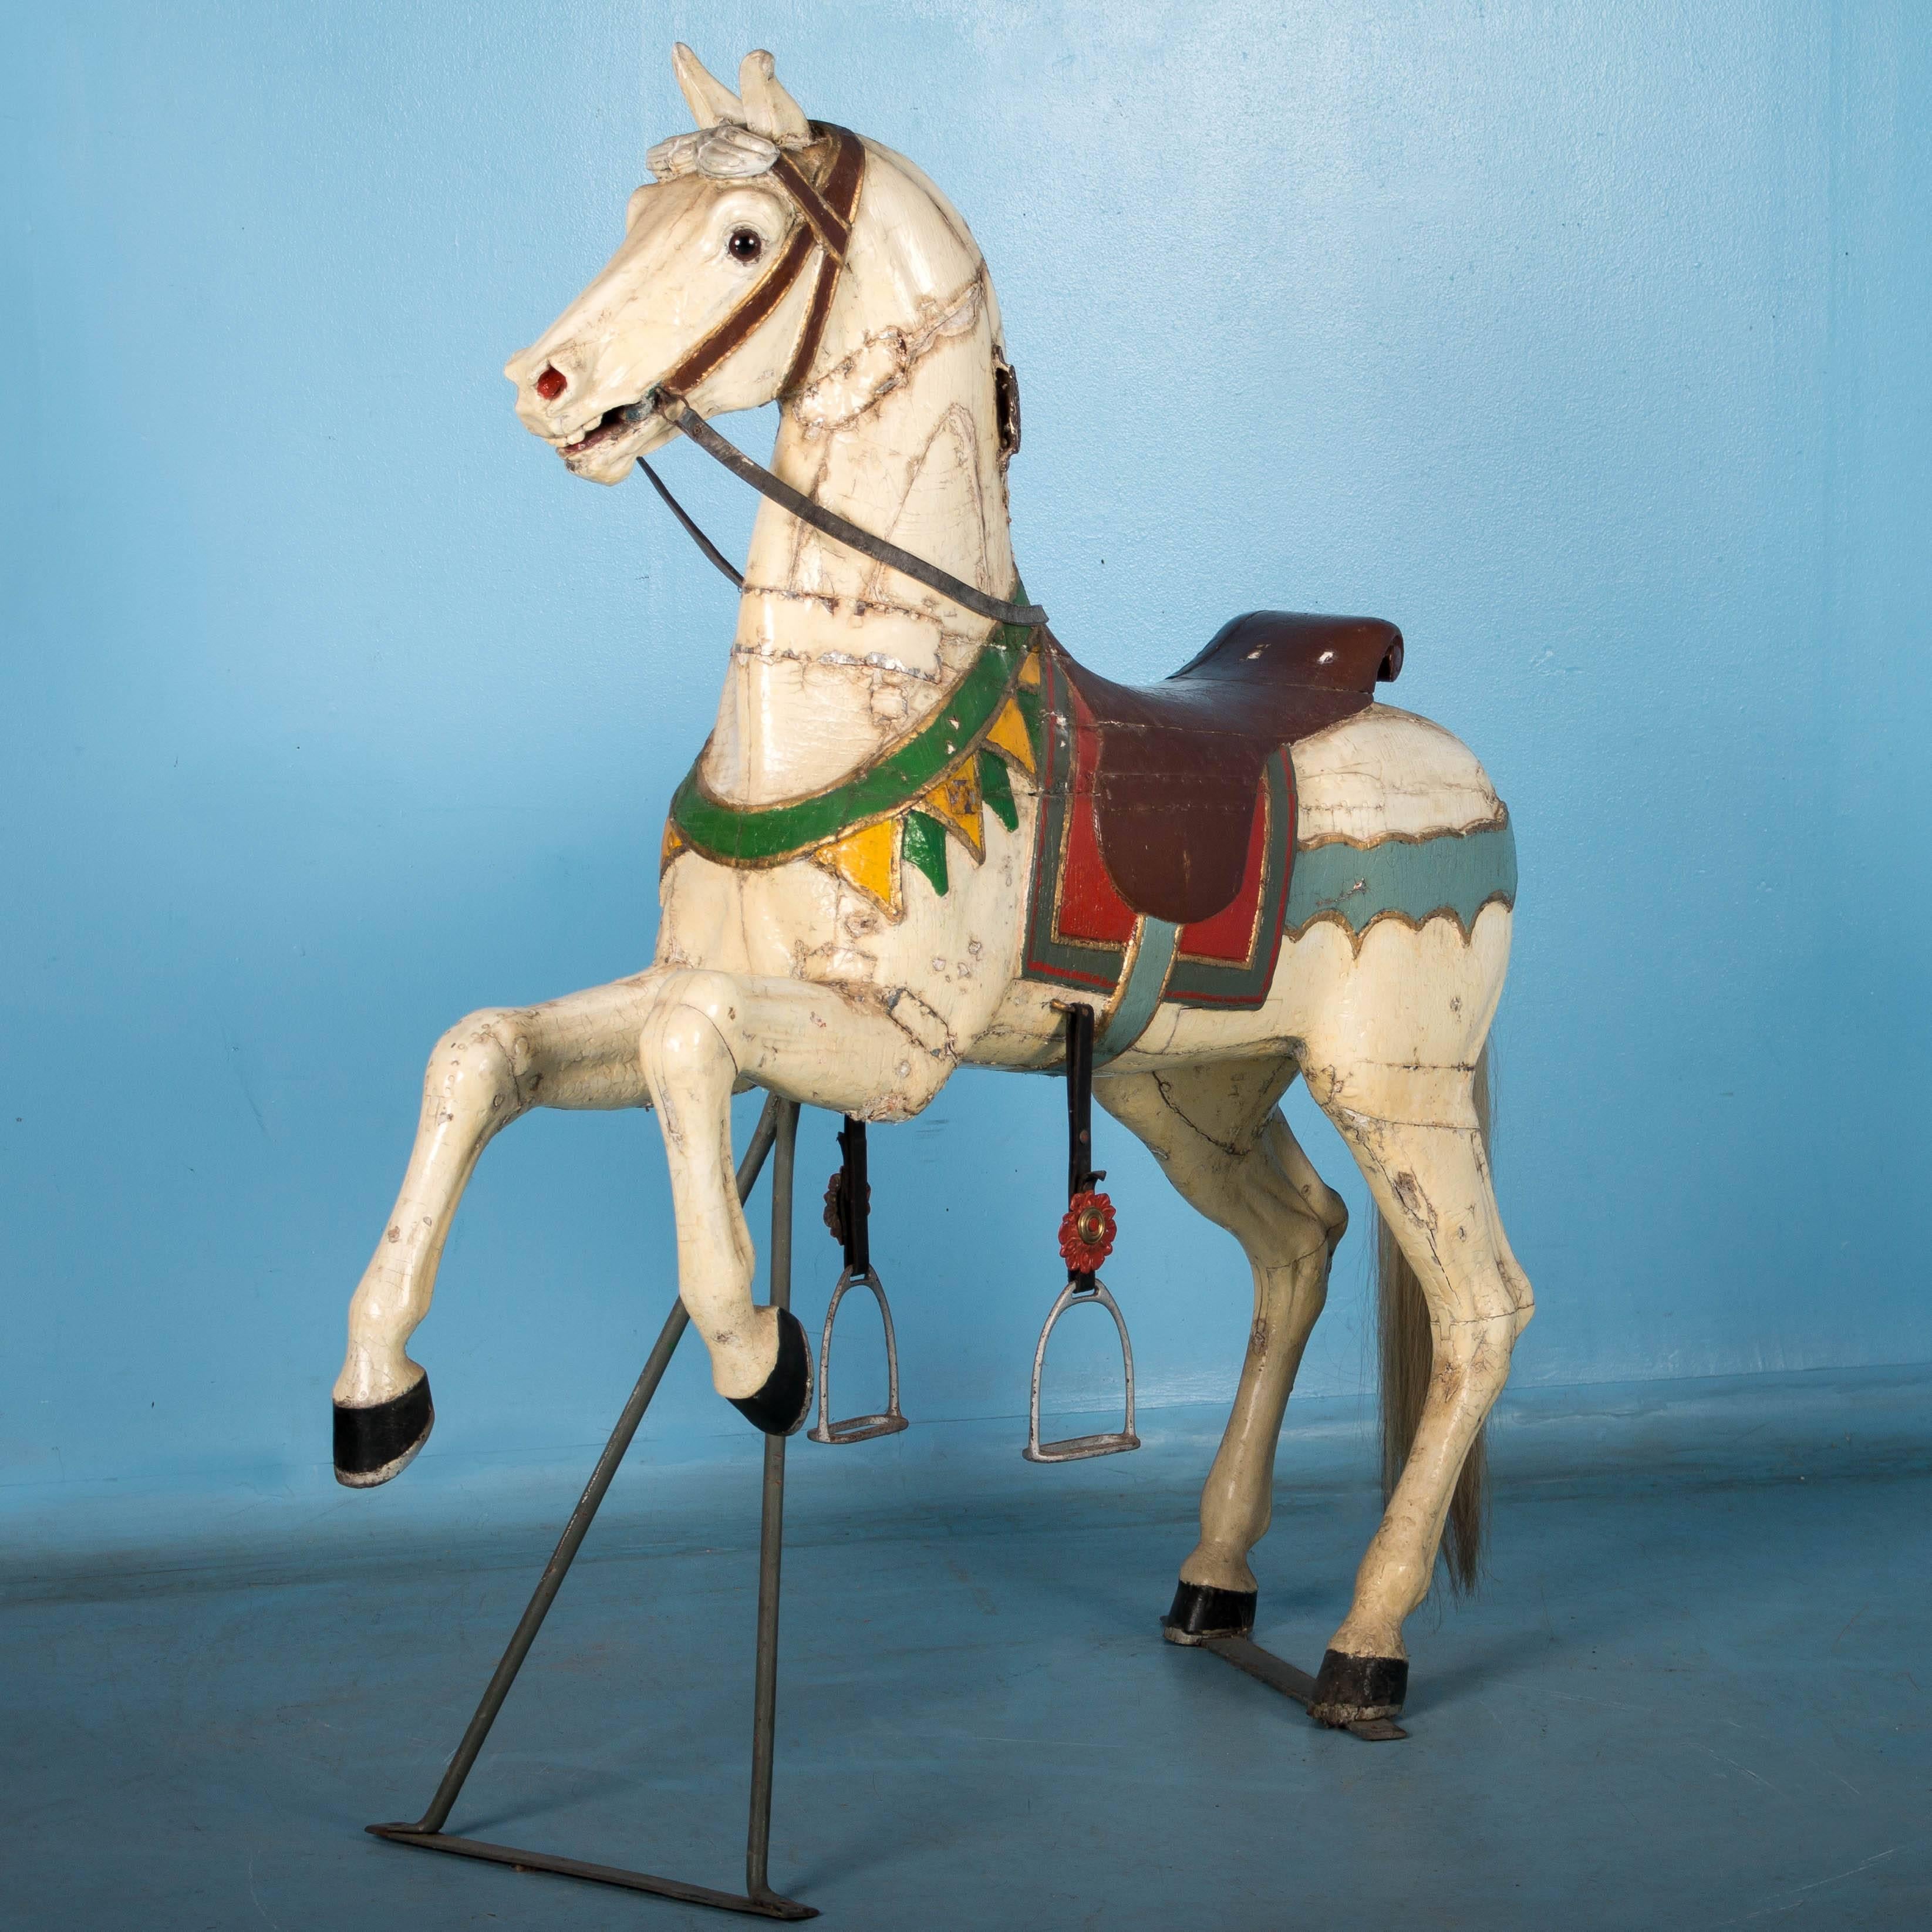 Whimsy and delight of an age gone by exude from this wonderful old carved Tivoli horse from Copenhagen. The age related repairs include the addition of metal bands (see around the neck and right knee) which truly add character to this amazing